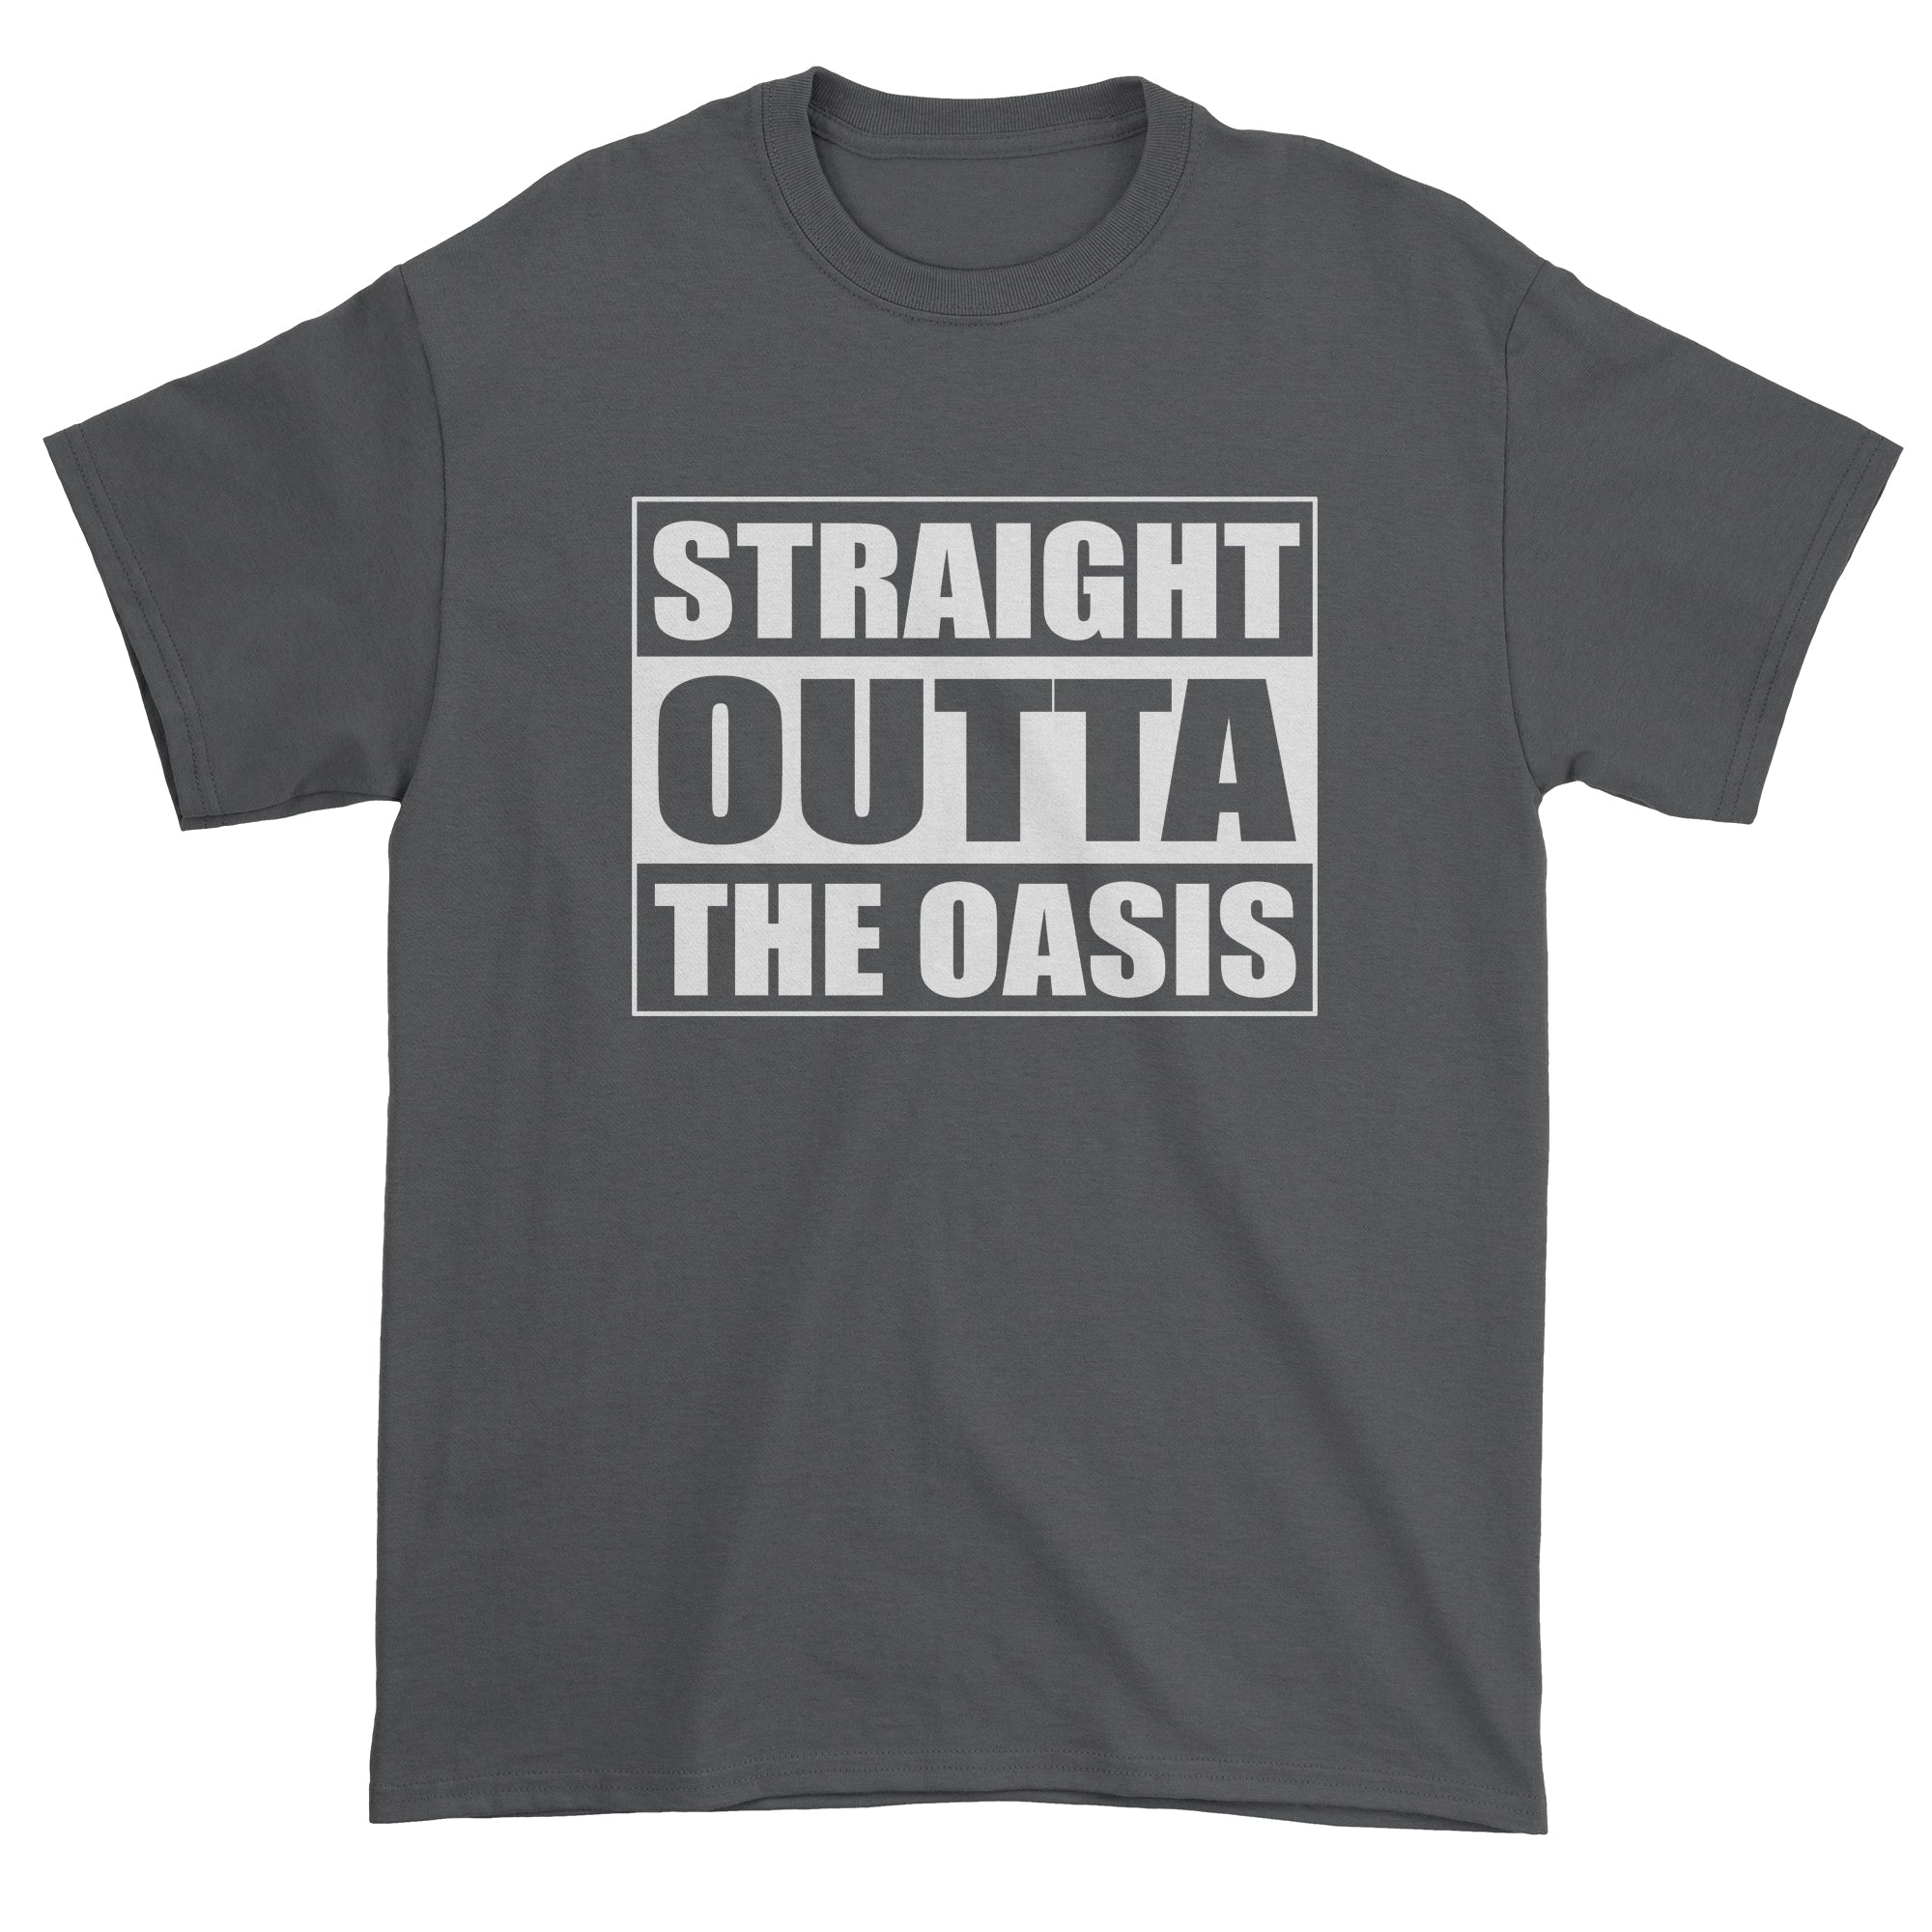 Striaght Outta The Oasis player one ready Men's T-Shirt